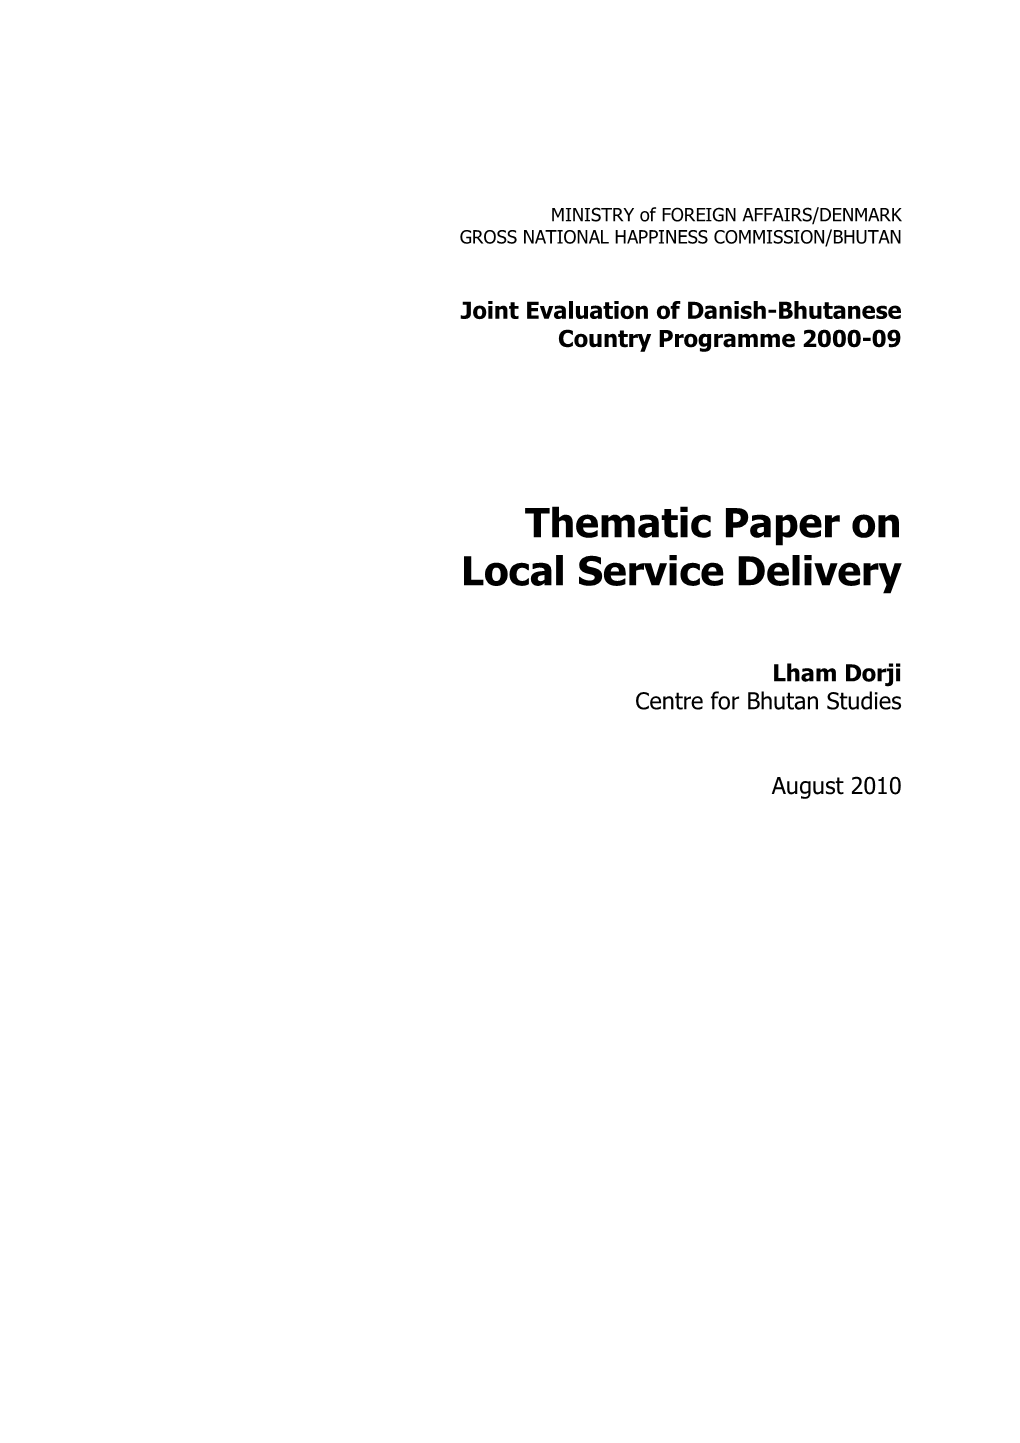 Thematic Paper on Local Service Delivery